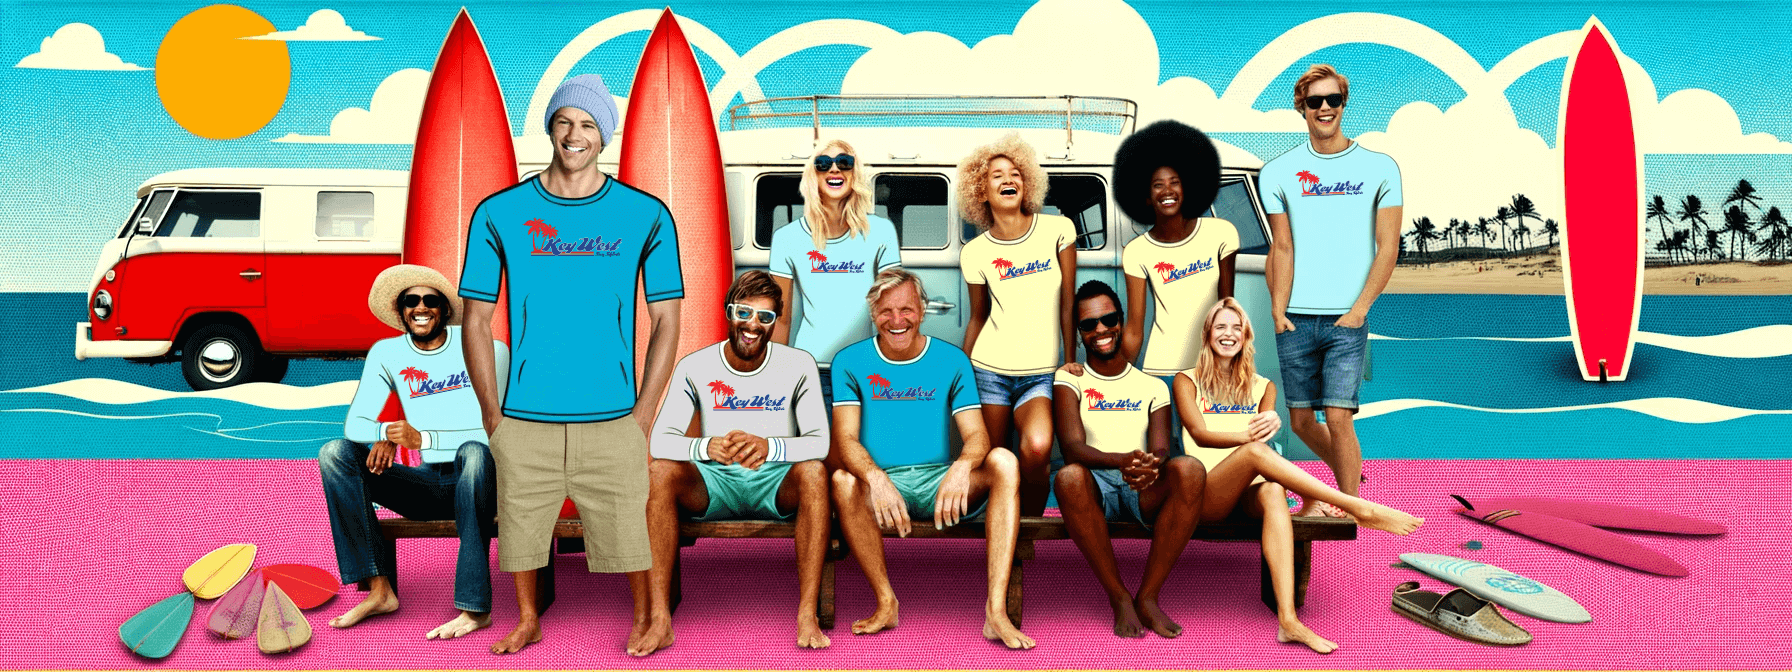 A group of people sitting on a bench with surfboards.